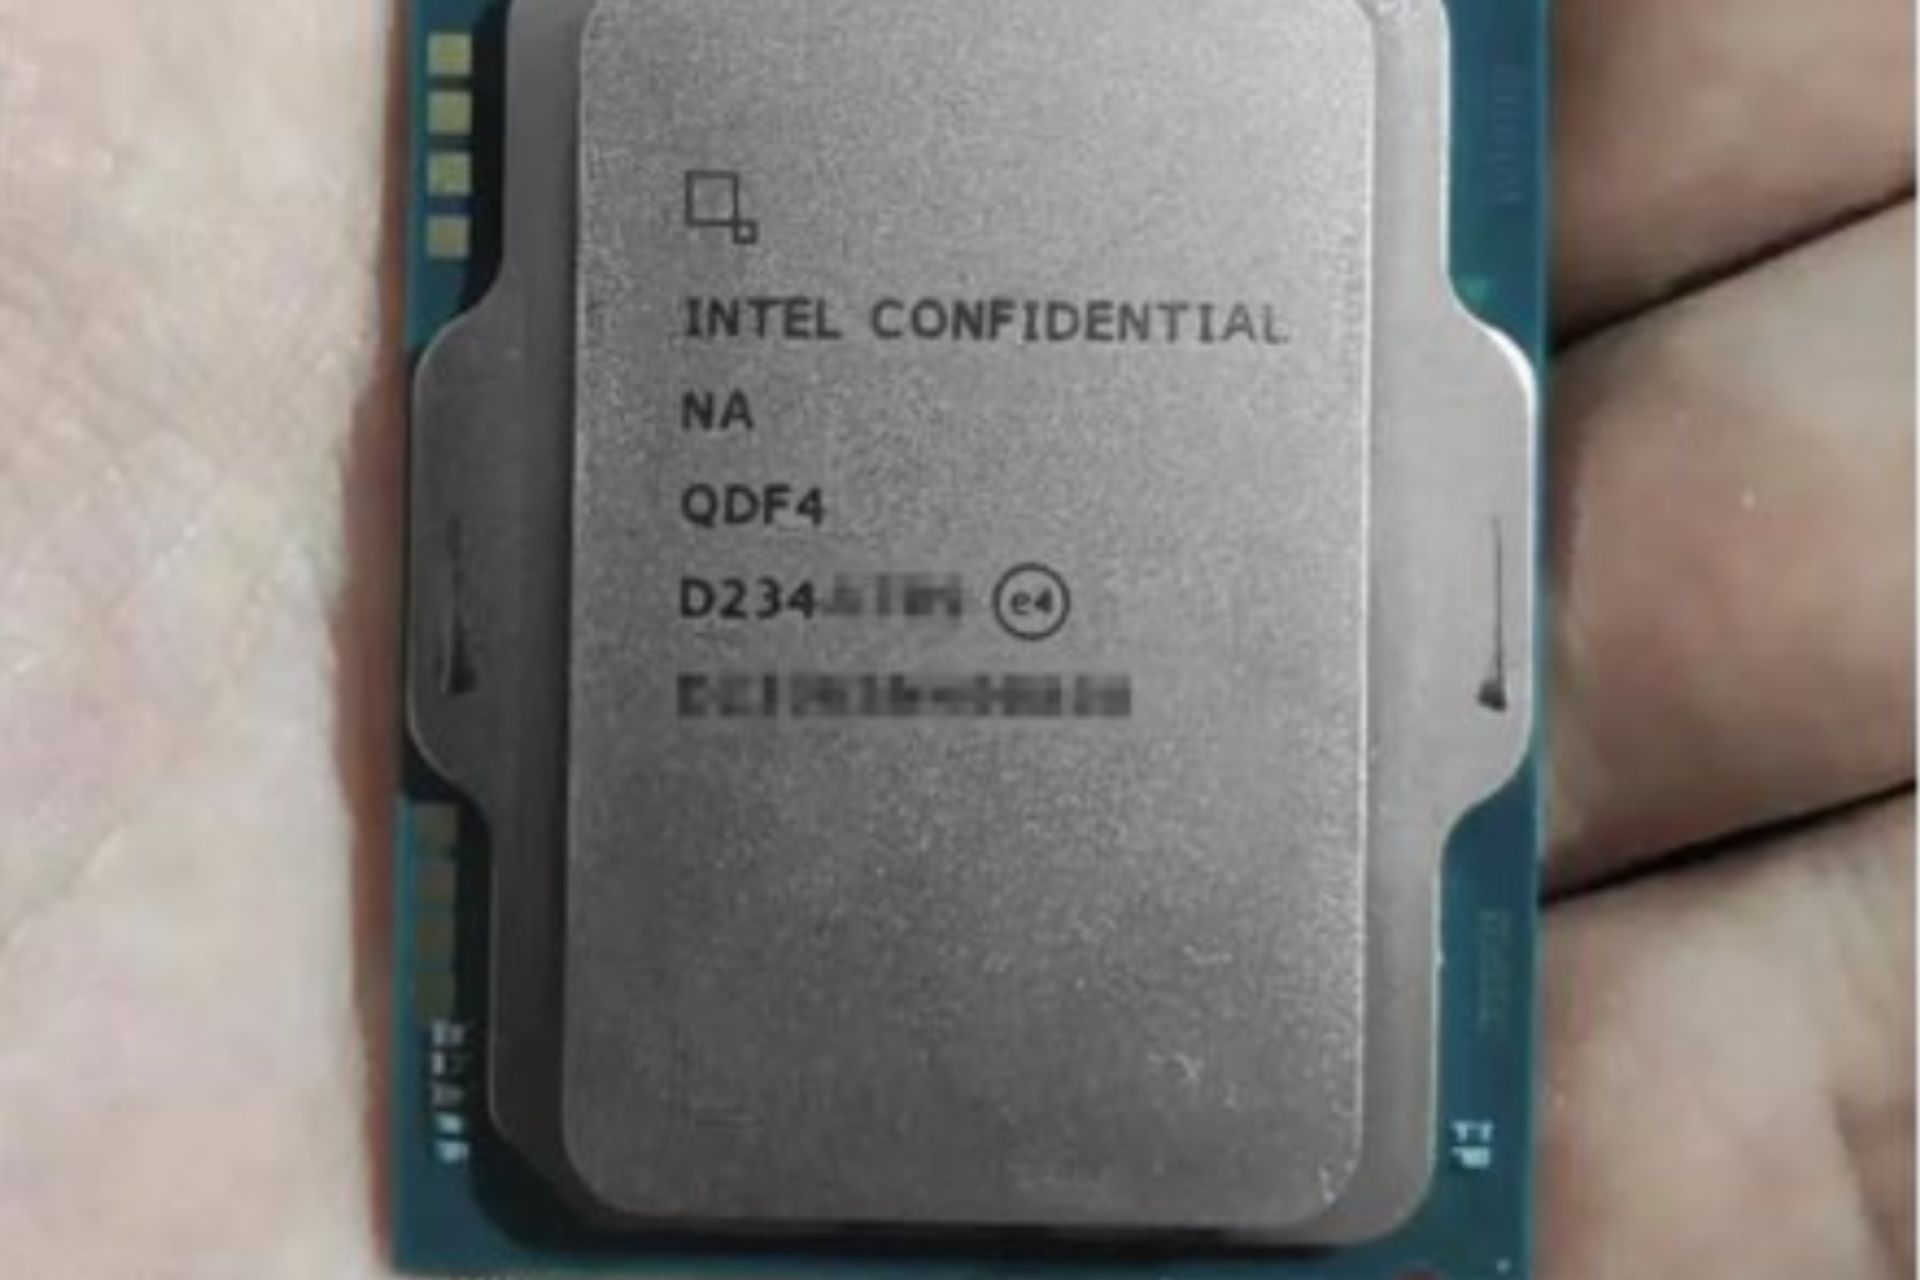 A Chinese vendor is selling Intel's Arrow Lake-S engineering samples for $14